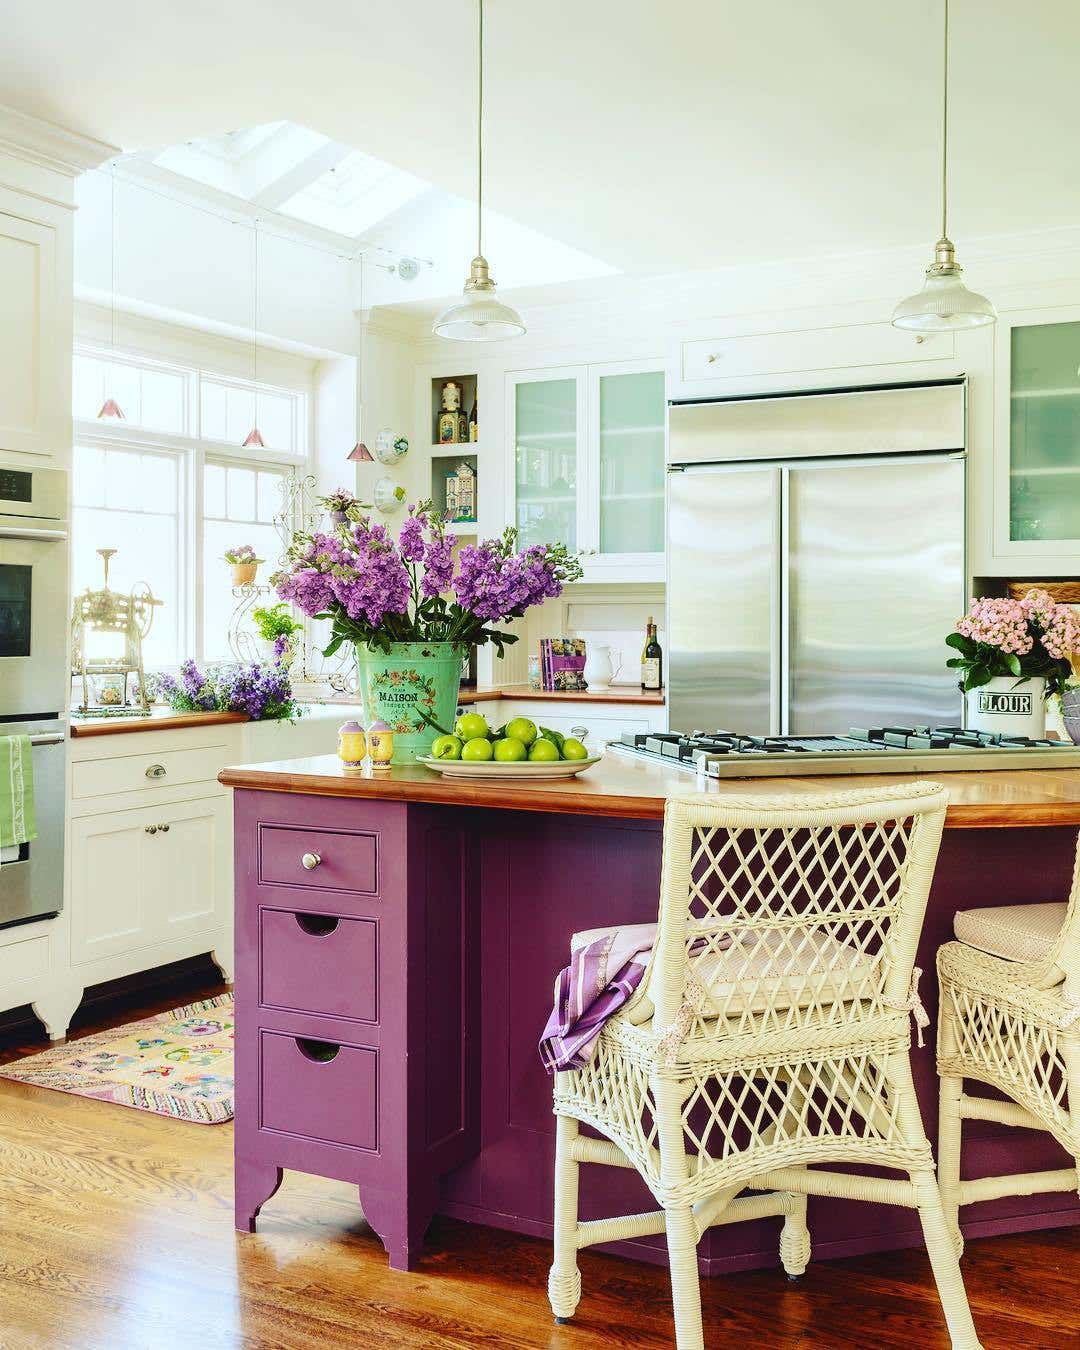 White kitchen cabinets paired with Purple Color kitchen island and wooden countertops, stainless steel appliances 